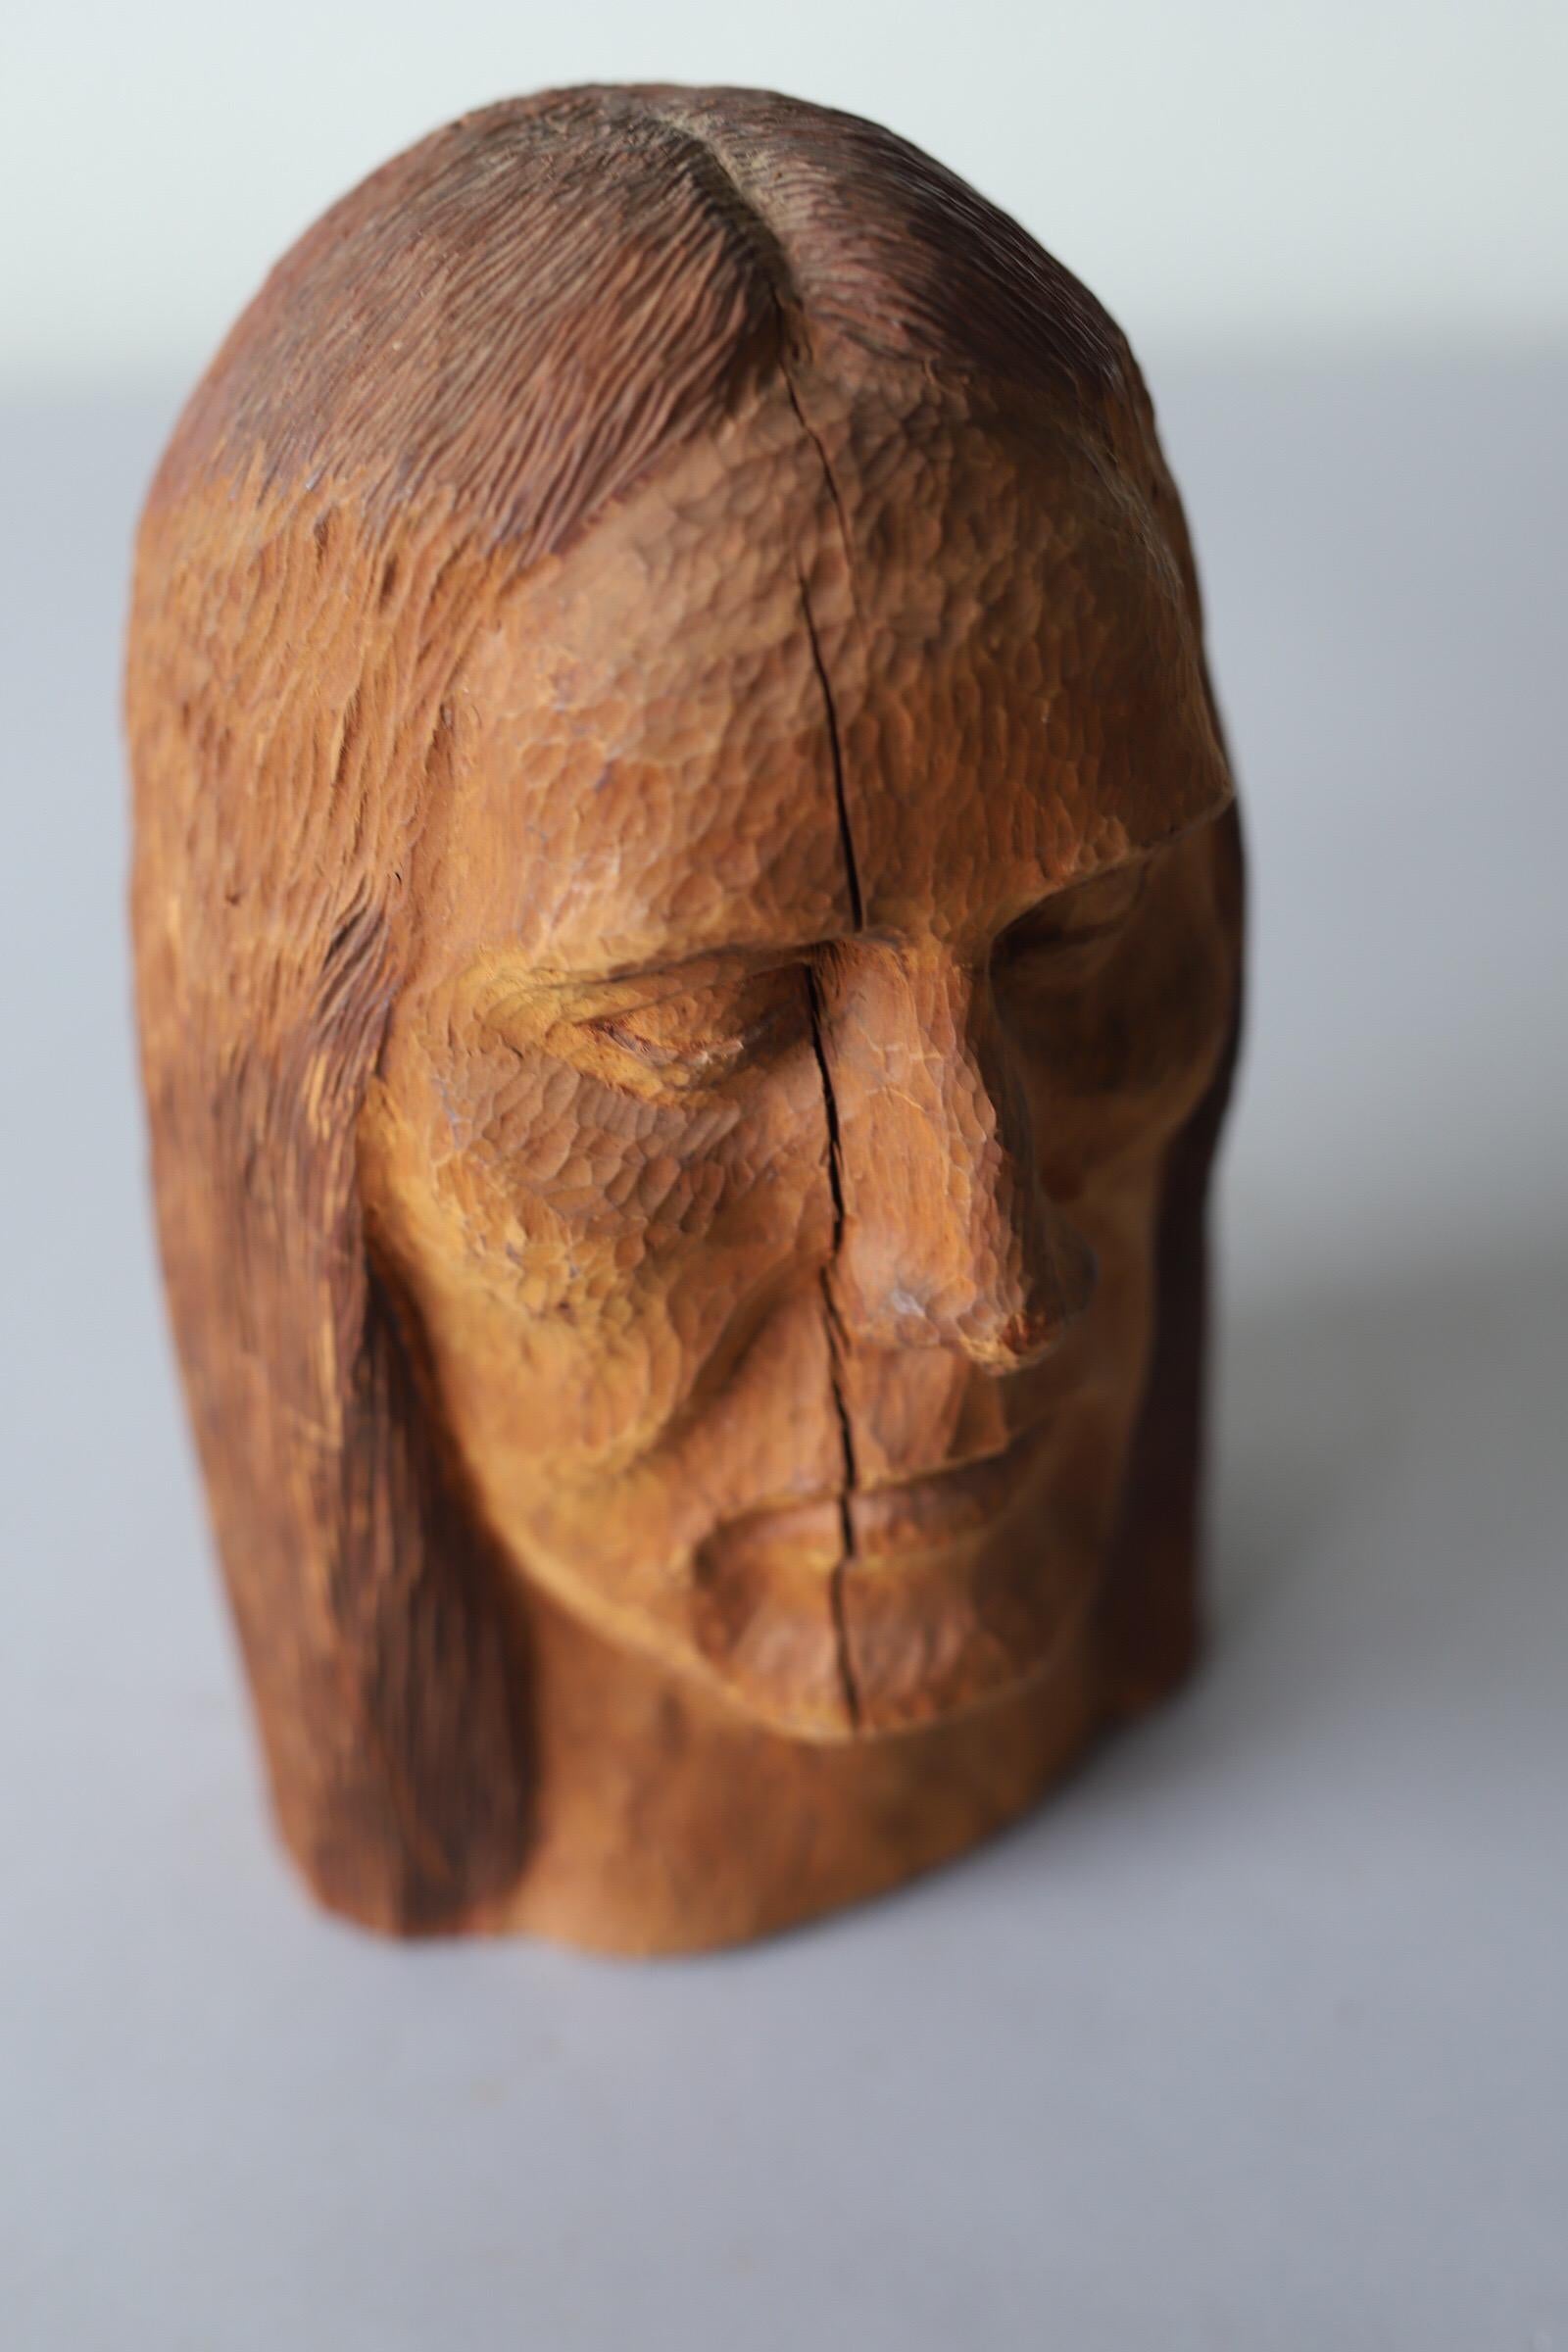 Amazing texture and detail on this hand carved wood head. A great accessory for any interior.